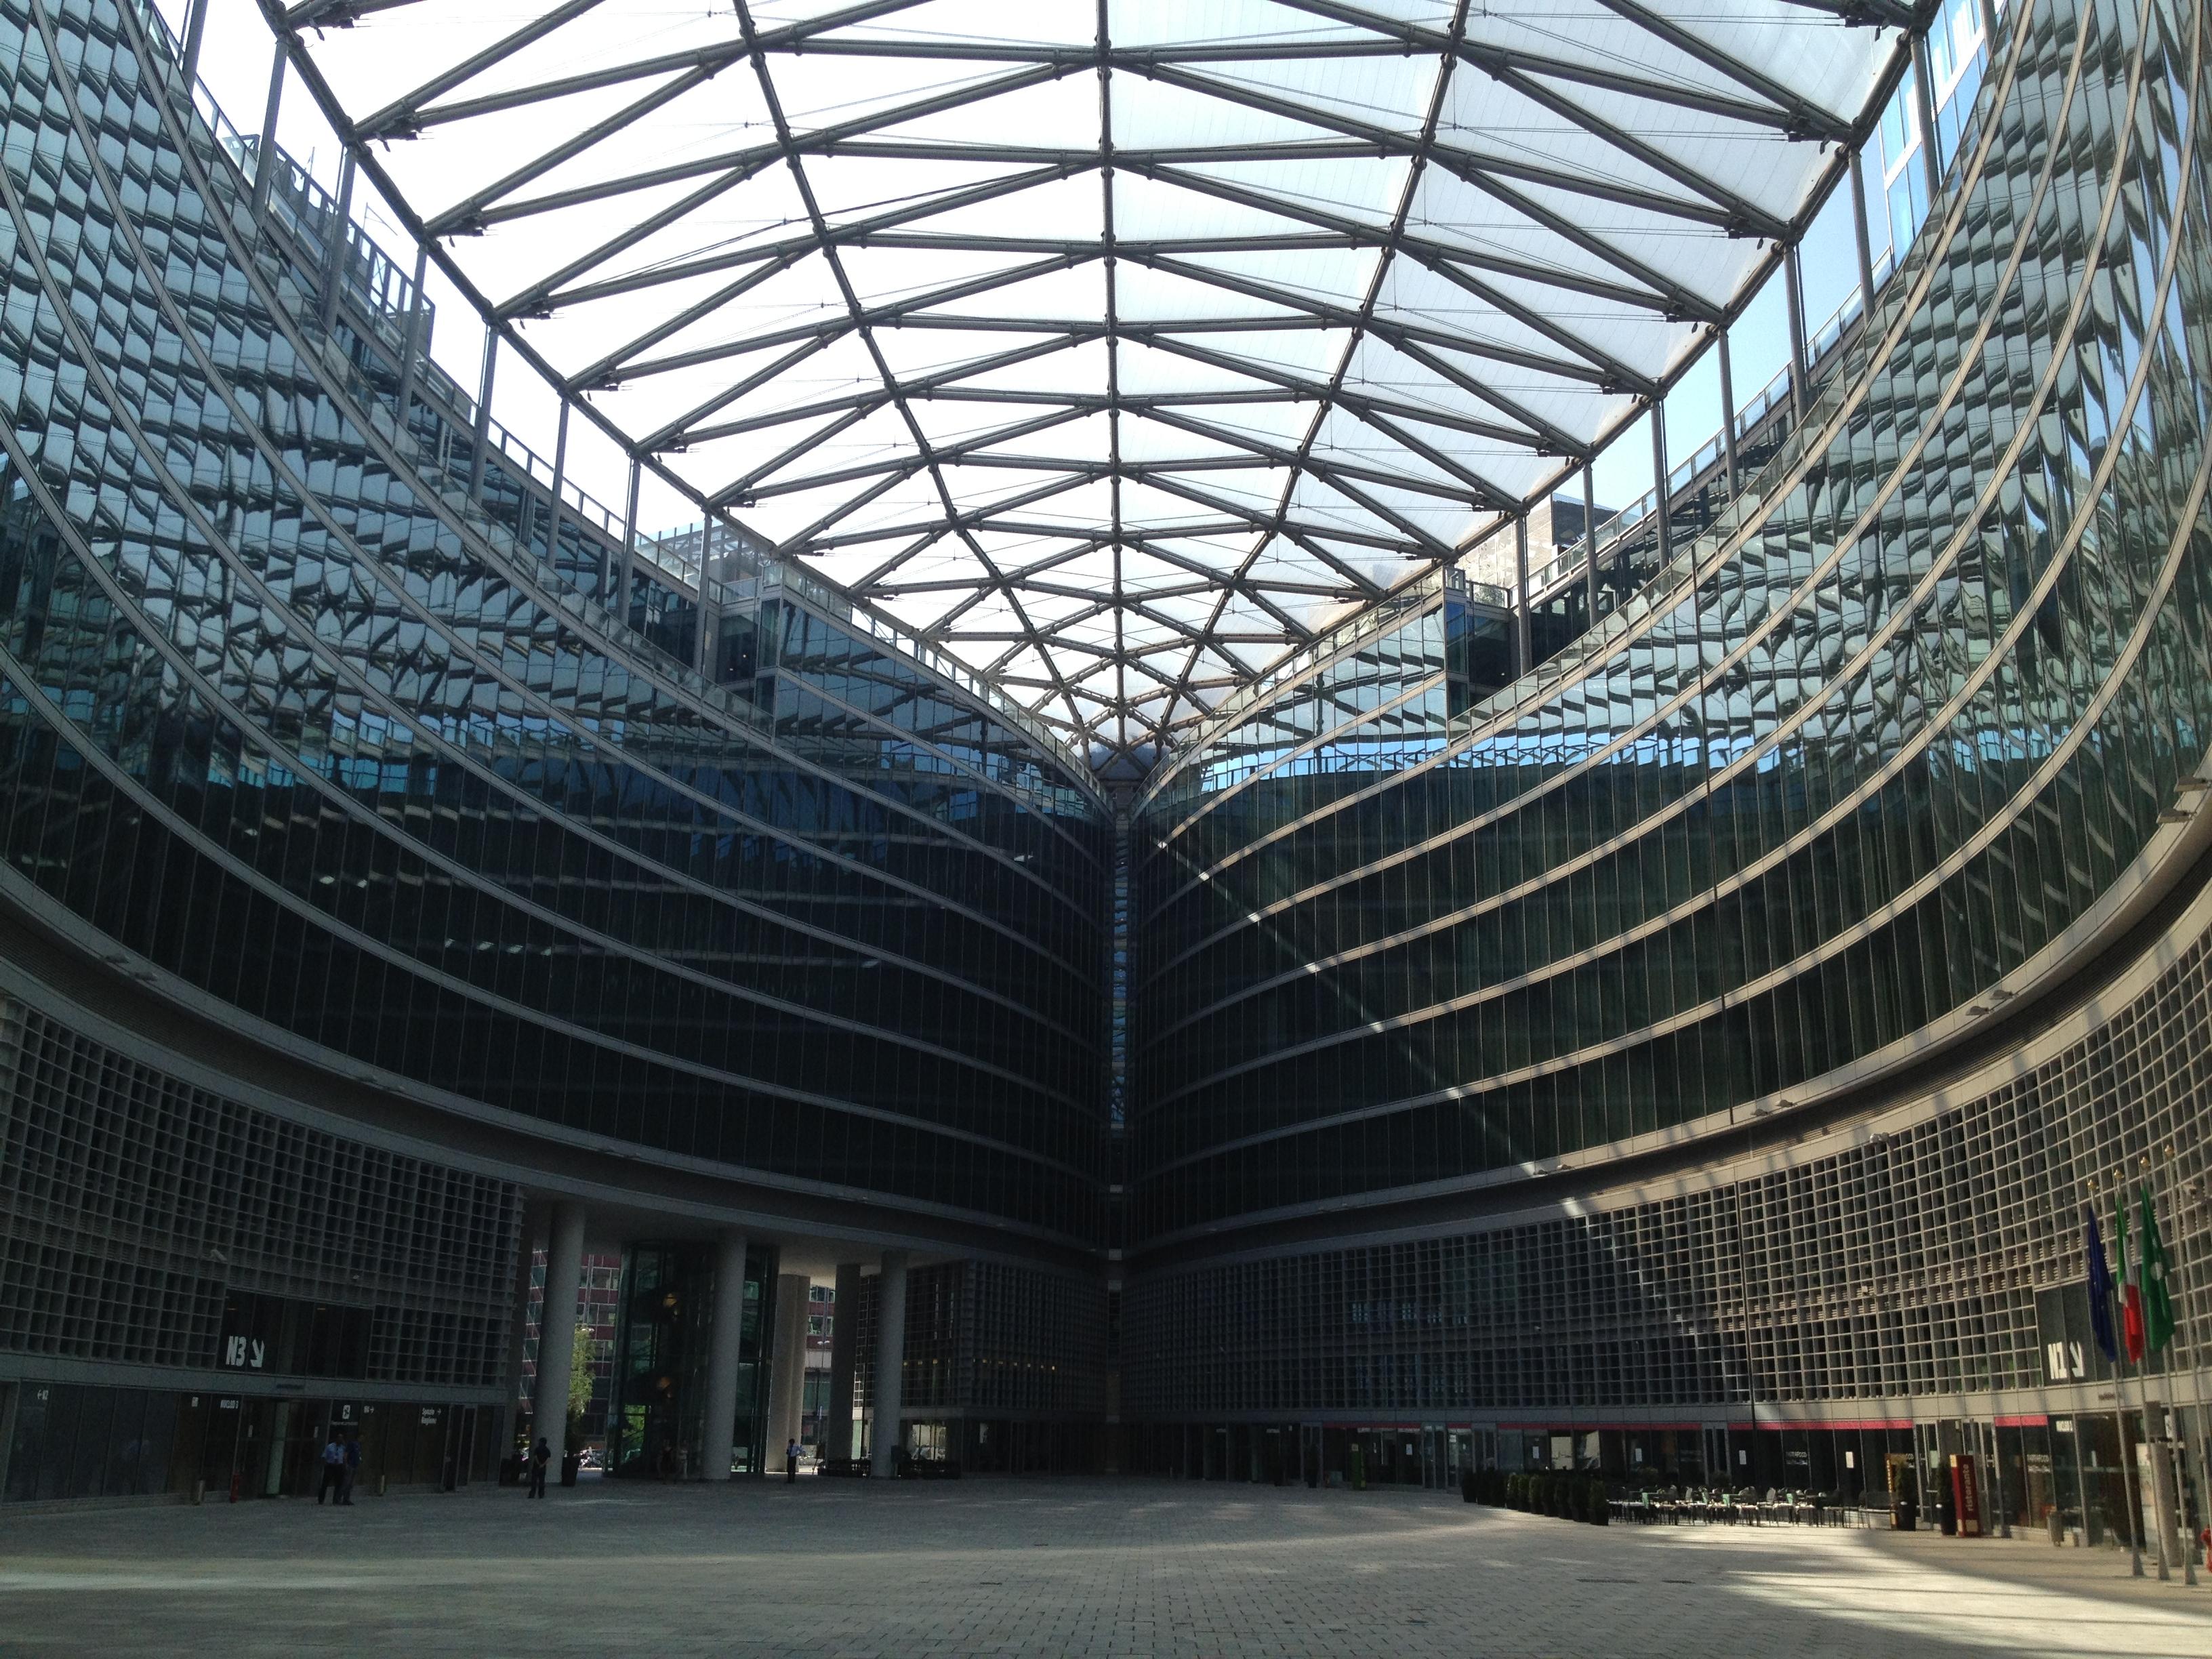 Cover image of this place Palazzo Lombardia